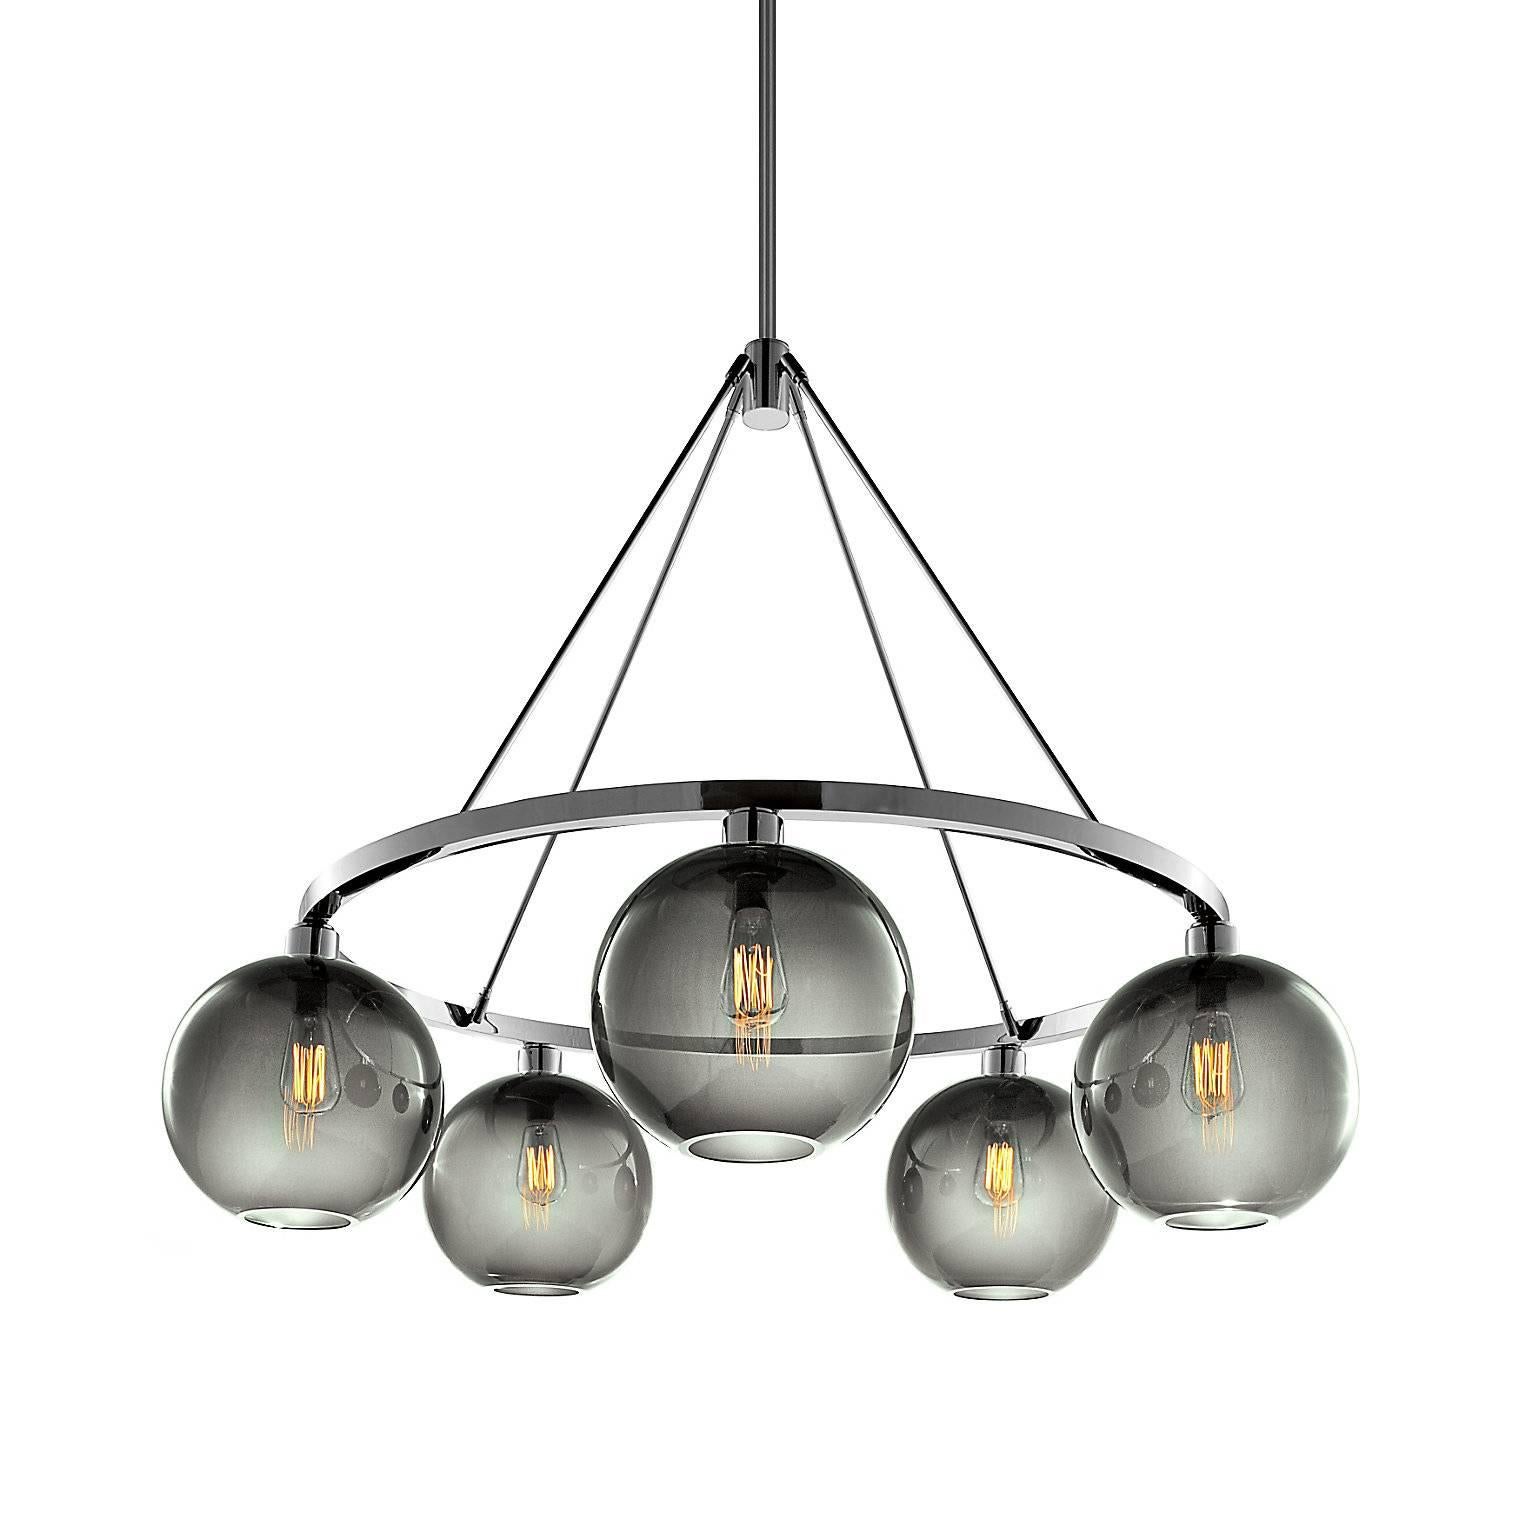 American Solitaire Amber Handblown Modern Glass Polished Nickel Chandelier Light For Sale